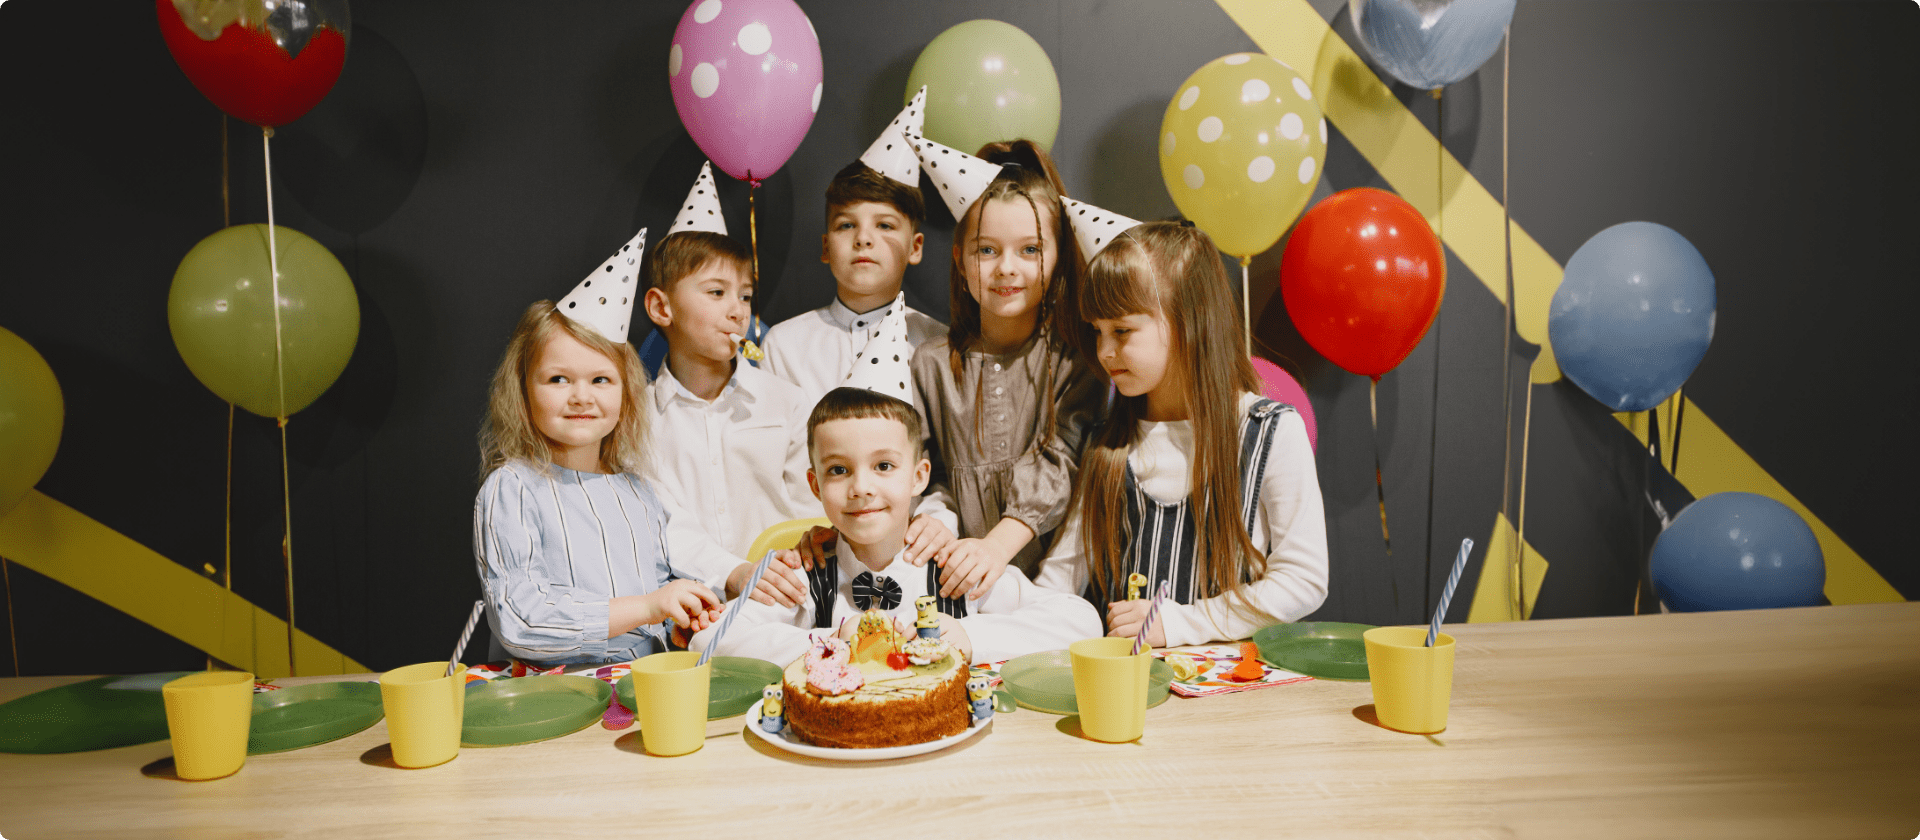 Kids Birthday Party for bowmi